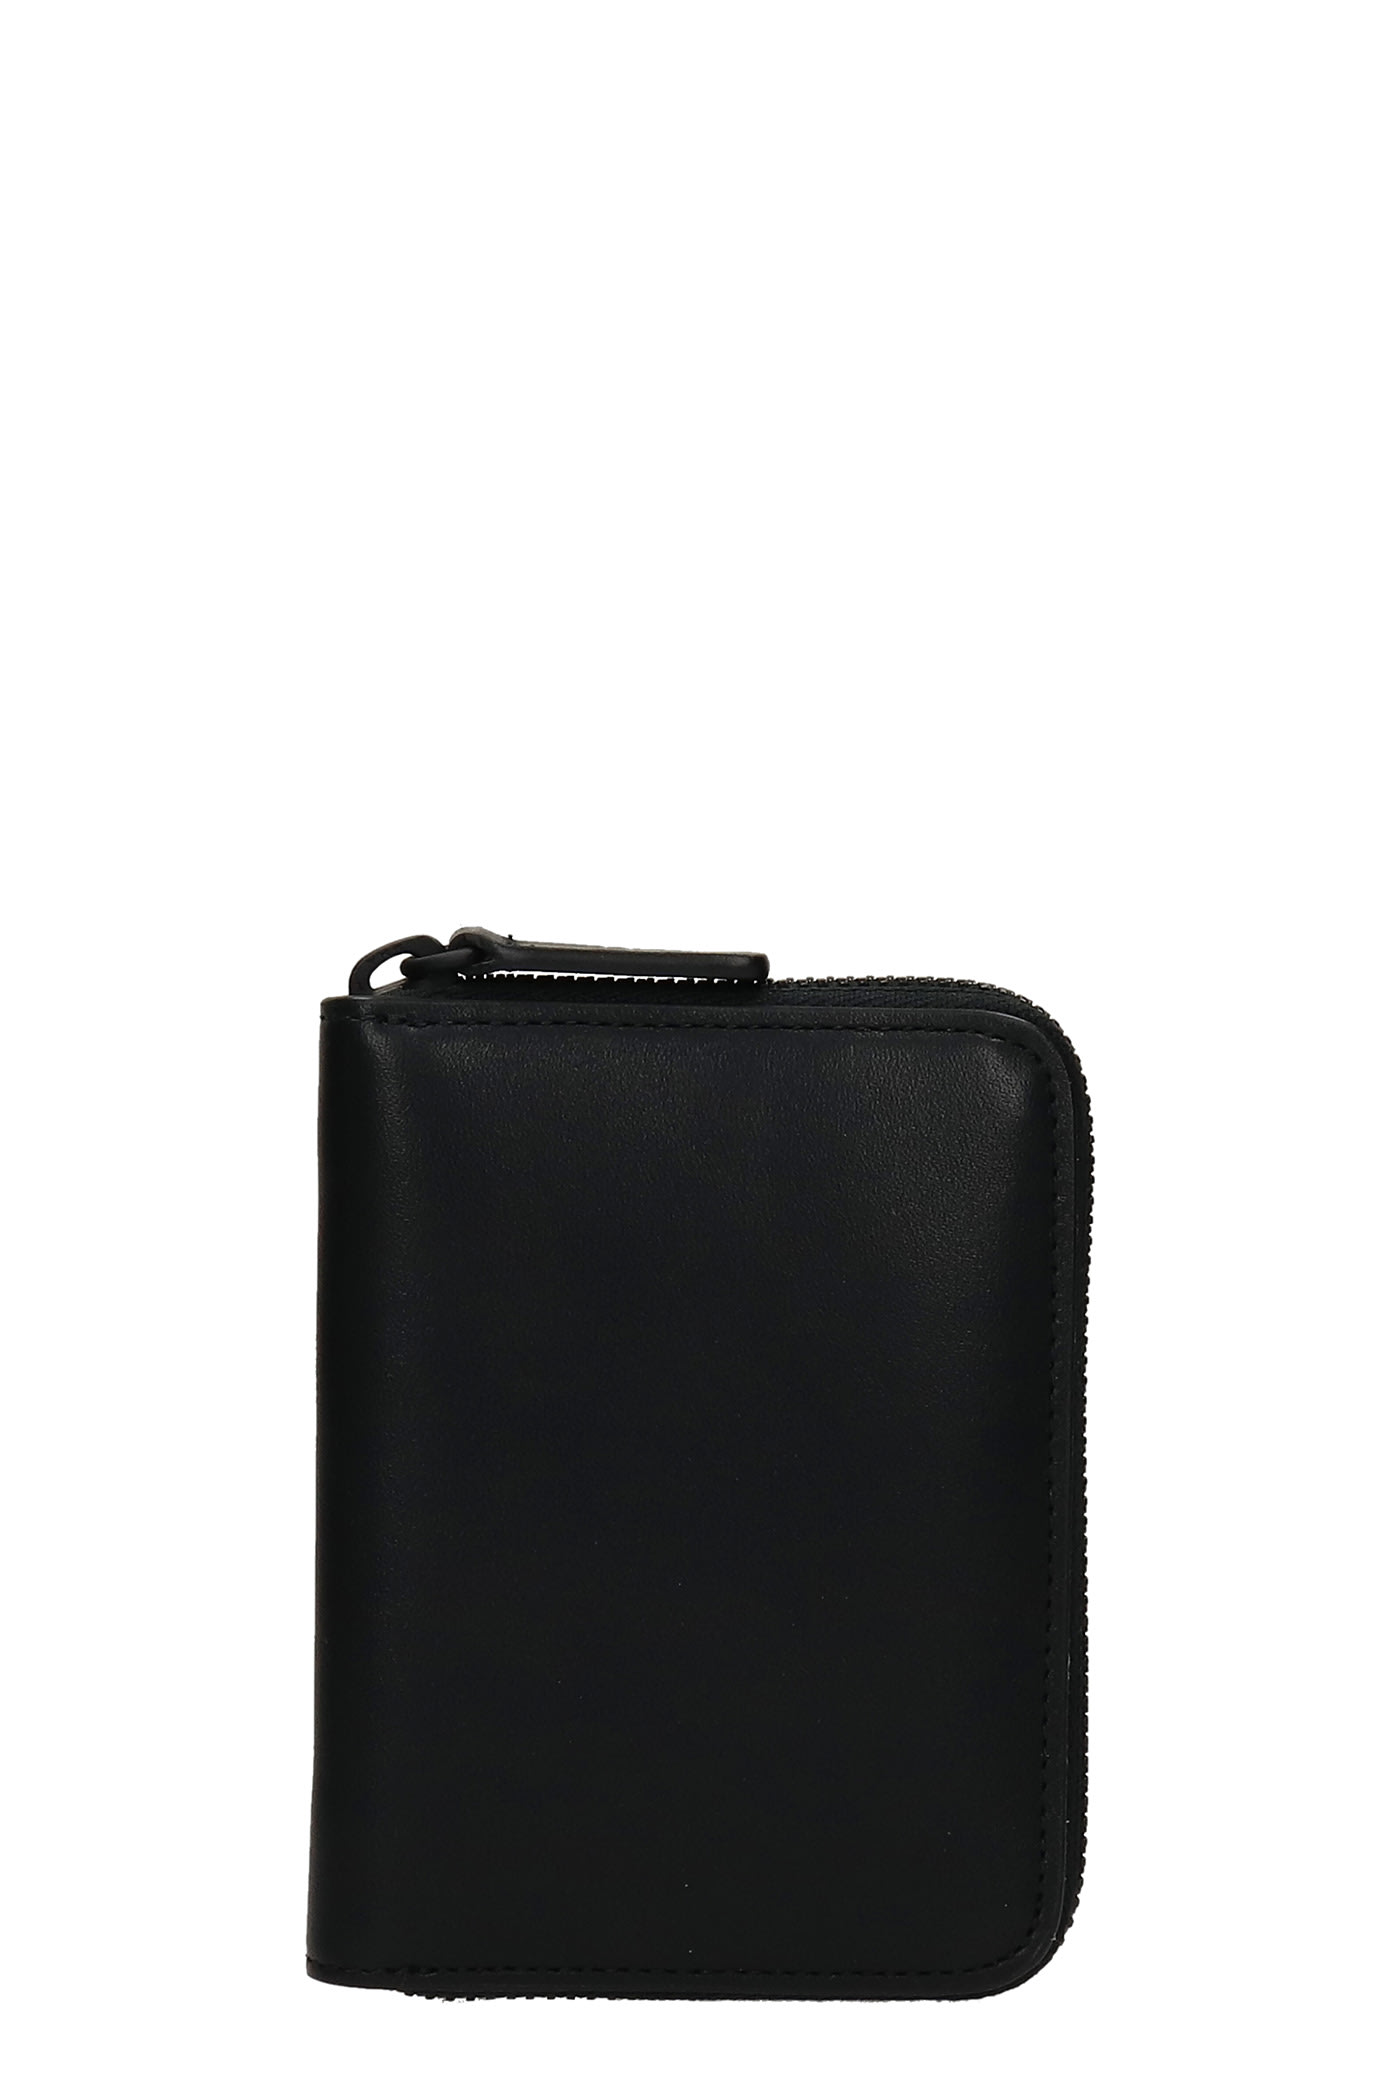 Common Projects Zip Coin Wallet In Black Leather